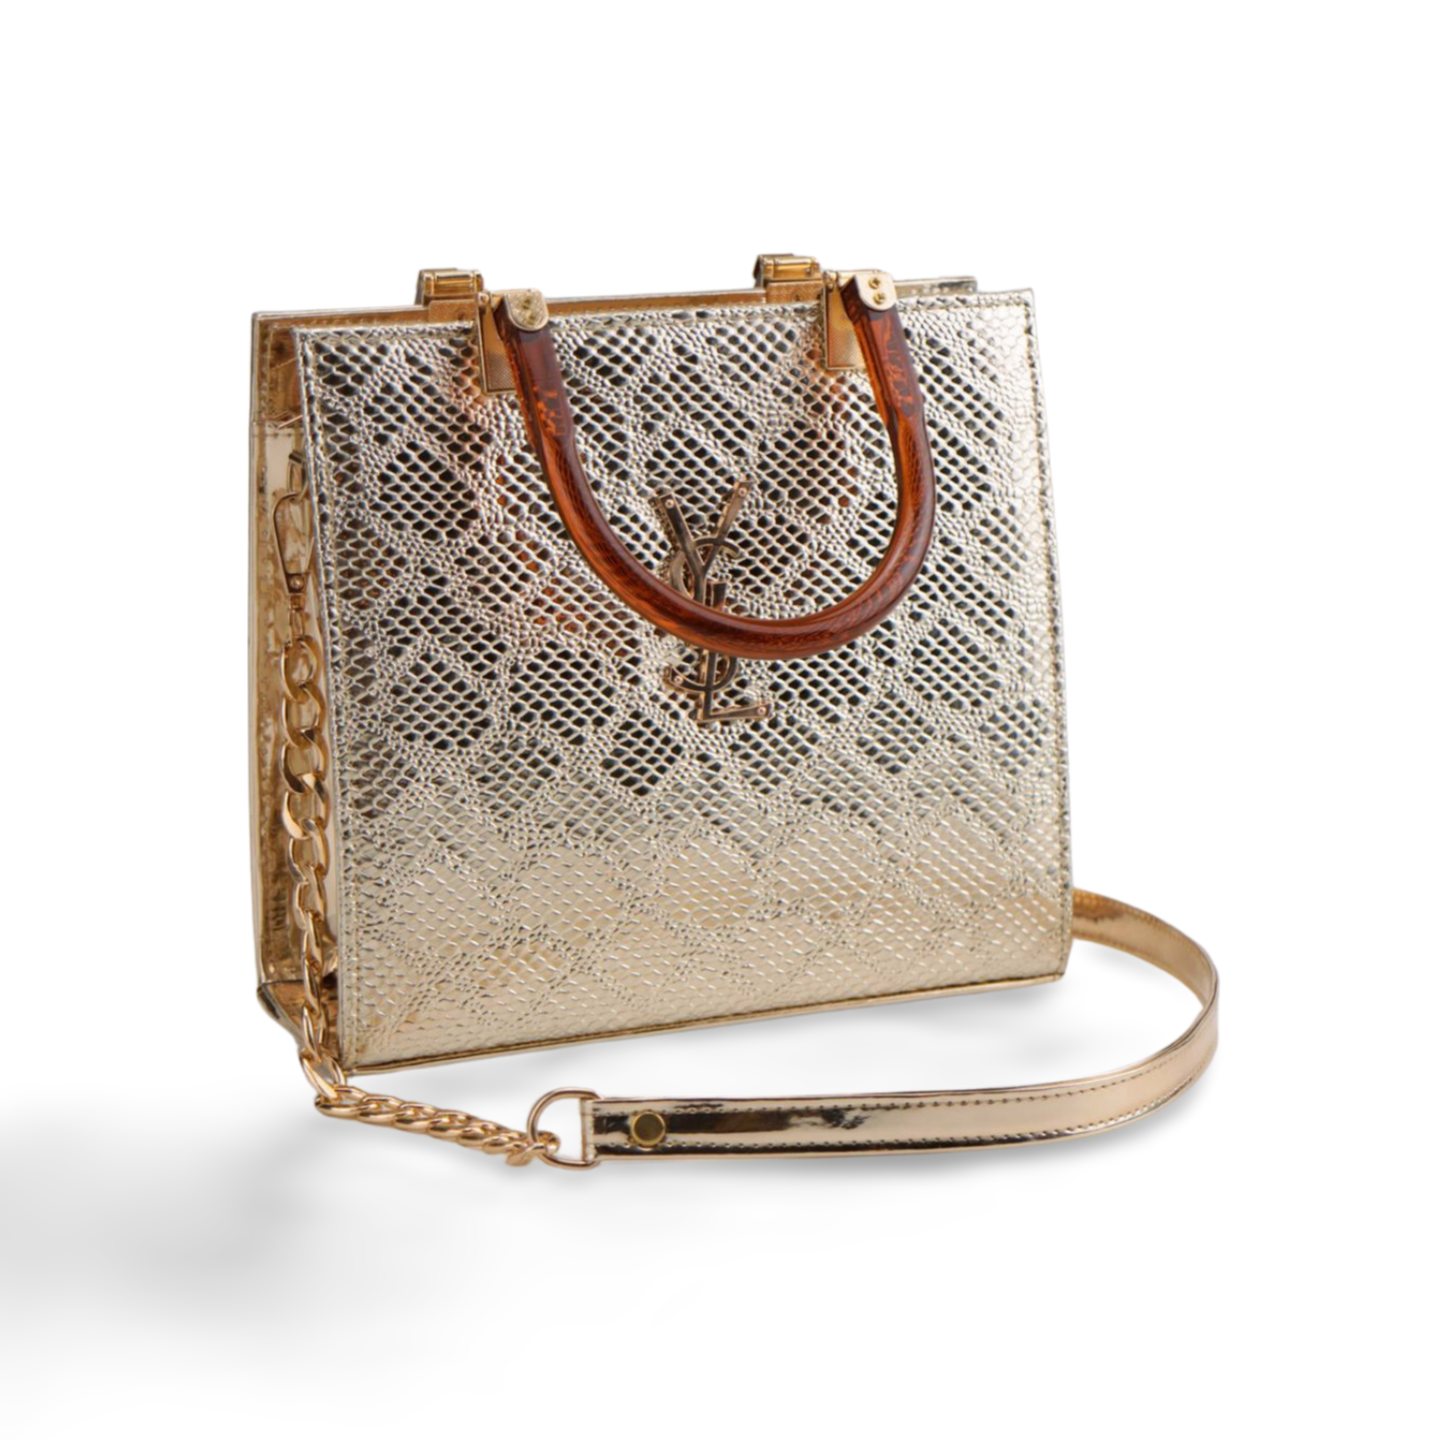 Stylish Crock Skin Handbag with Wooden Style Handles and Chain Strap